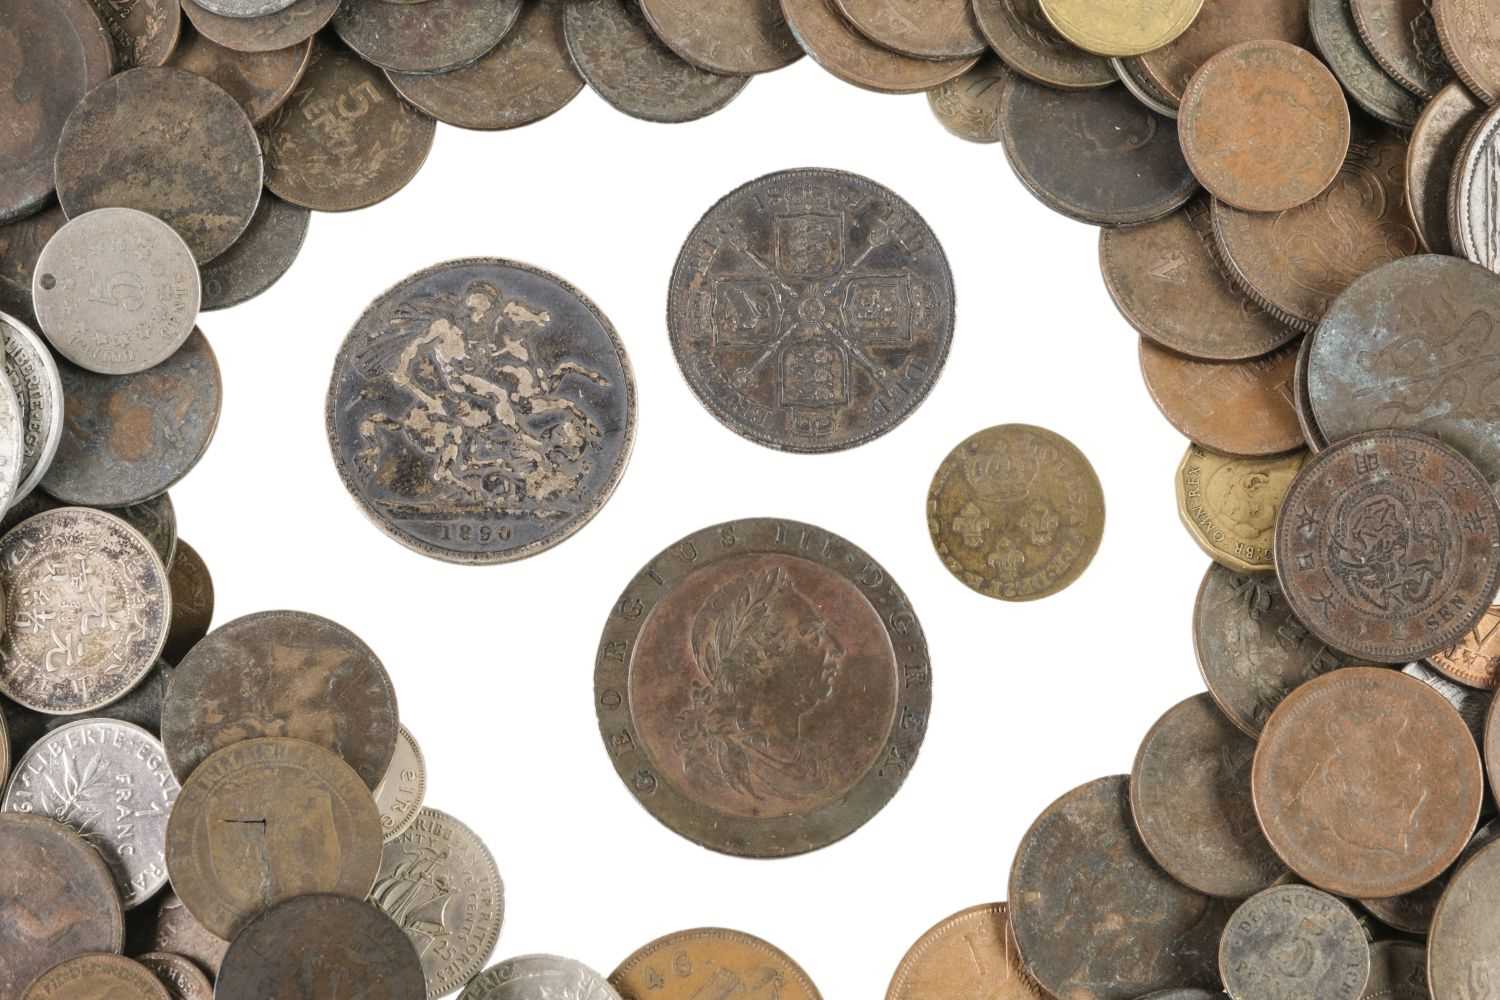 Lot 234 - Coins. Mixed collection of coins